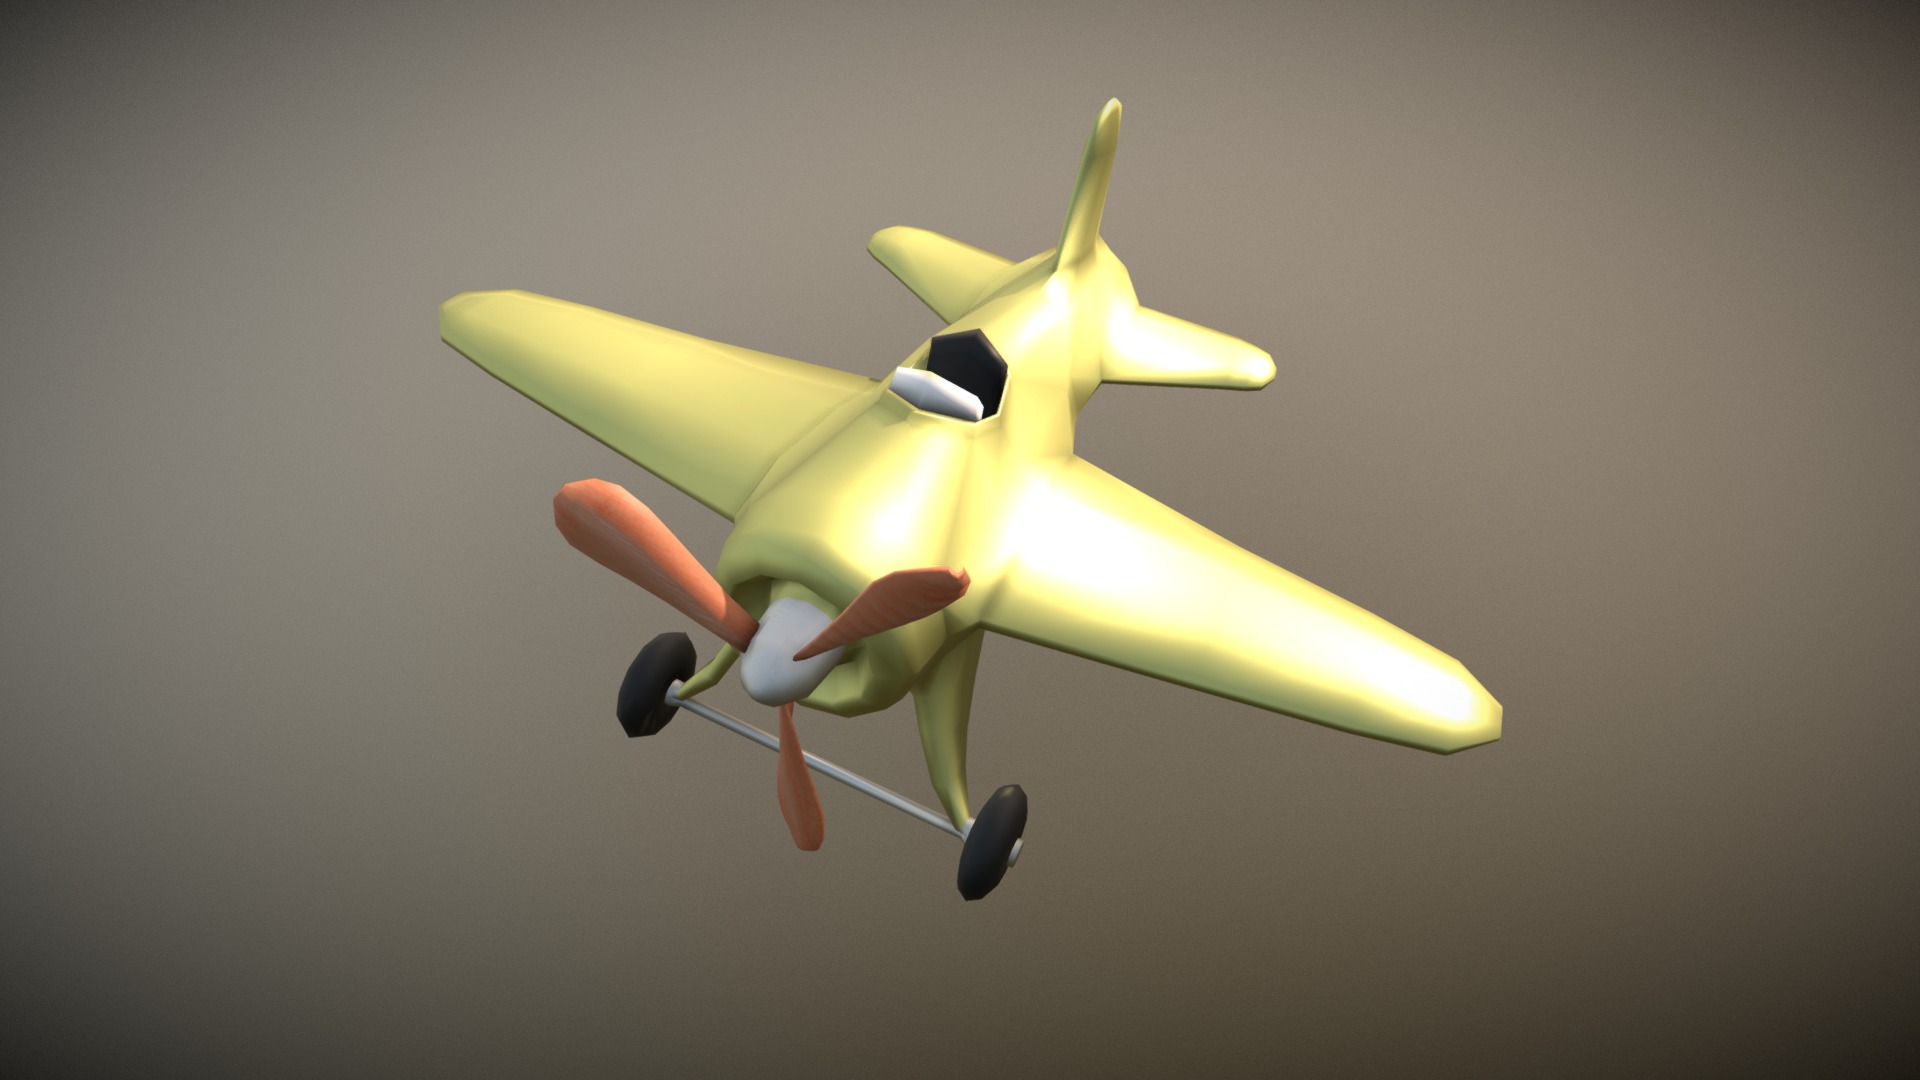 3D model Game Ready Aeroplane Yellow Low Poly - This is a 3D model of the Game Ready Aeroplane Yellow Low Poly. The 3D model is about a ceiling fan with a yellow light.